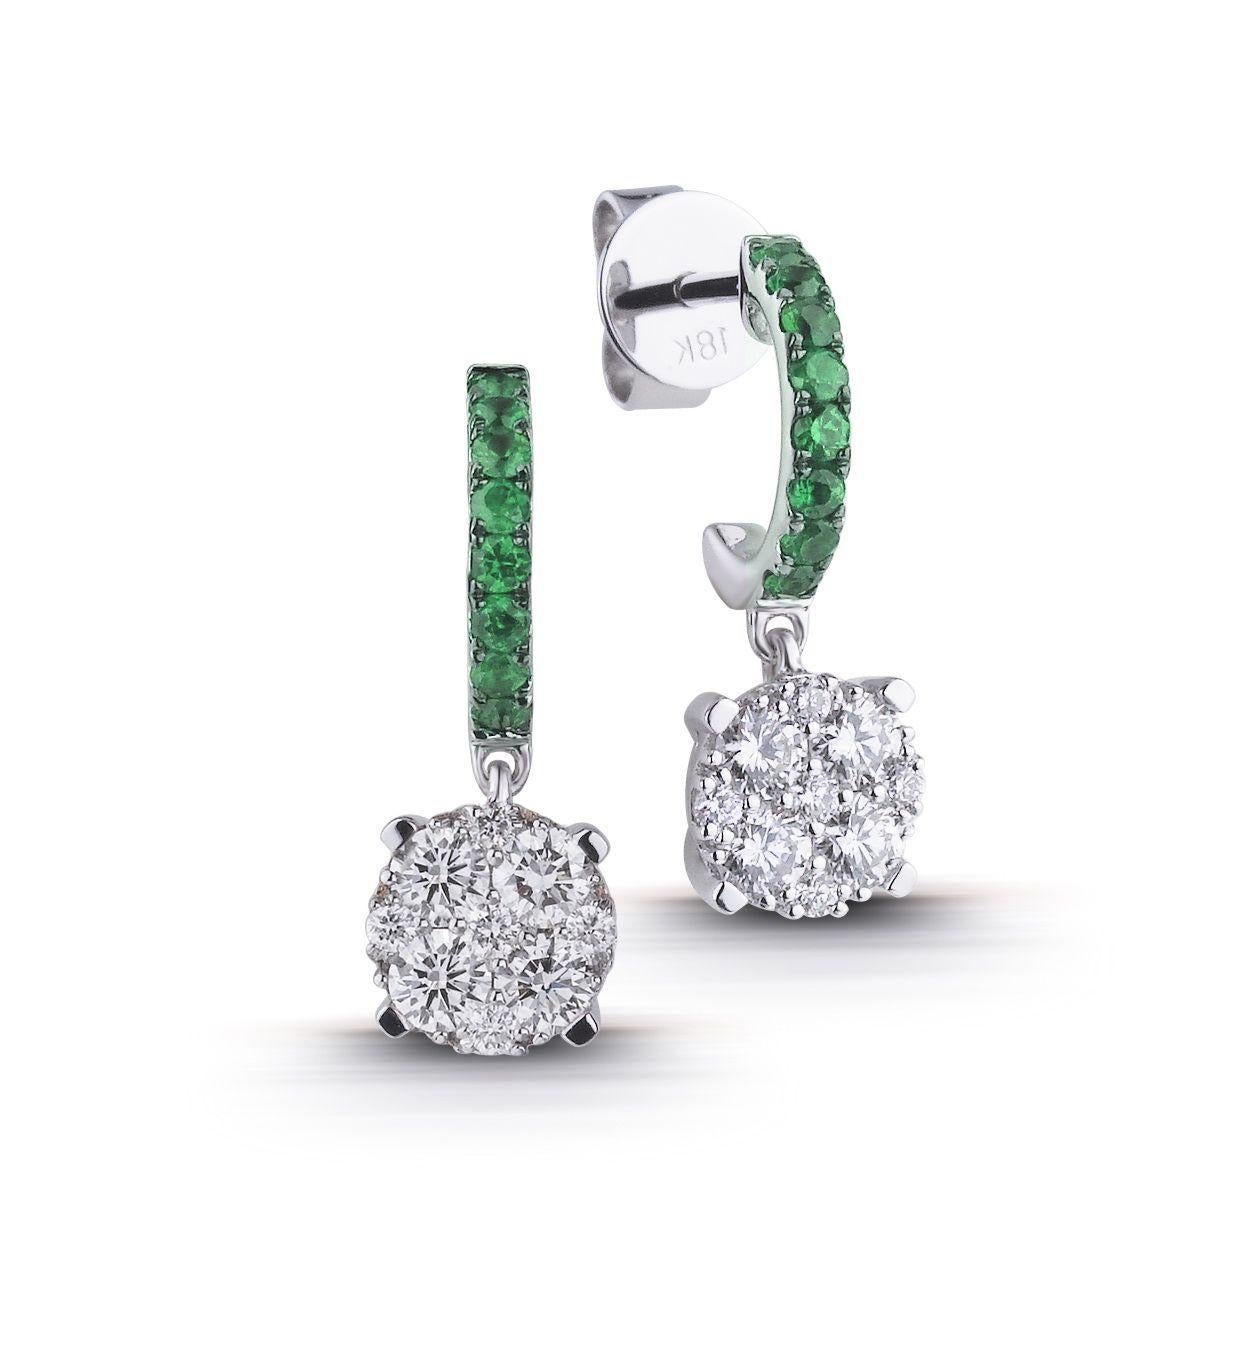 Round Cut Classy Emerald Diamond White 18 Karat Gold Earrings for Her For Sale